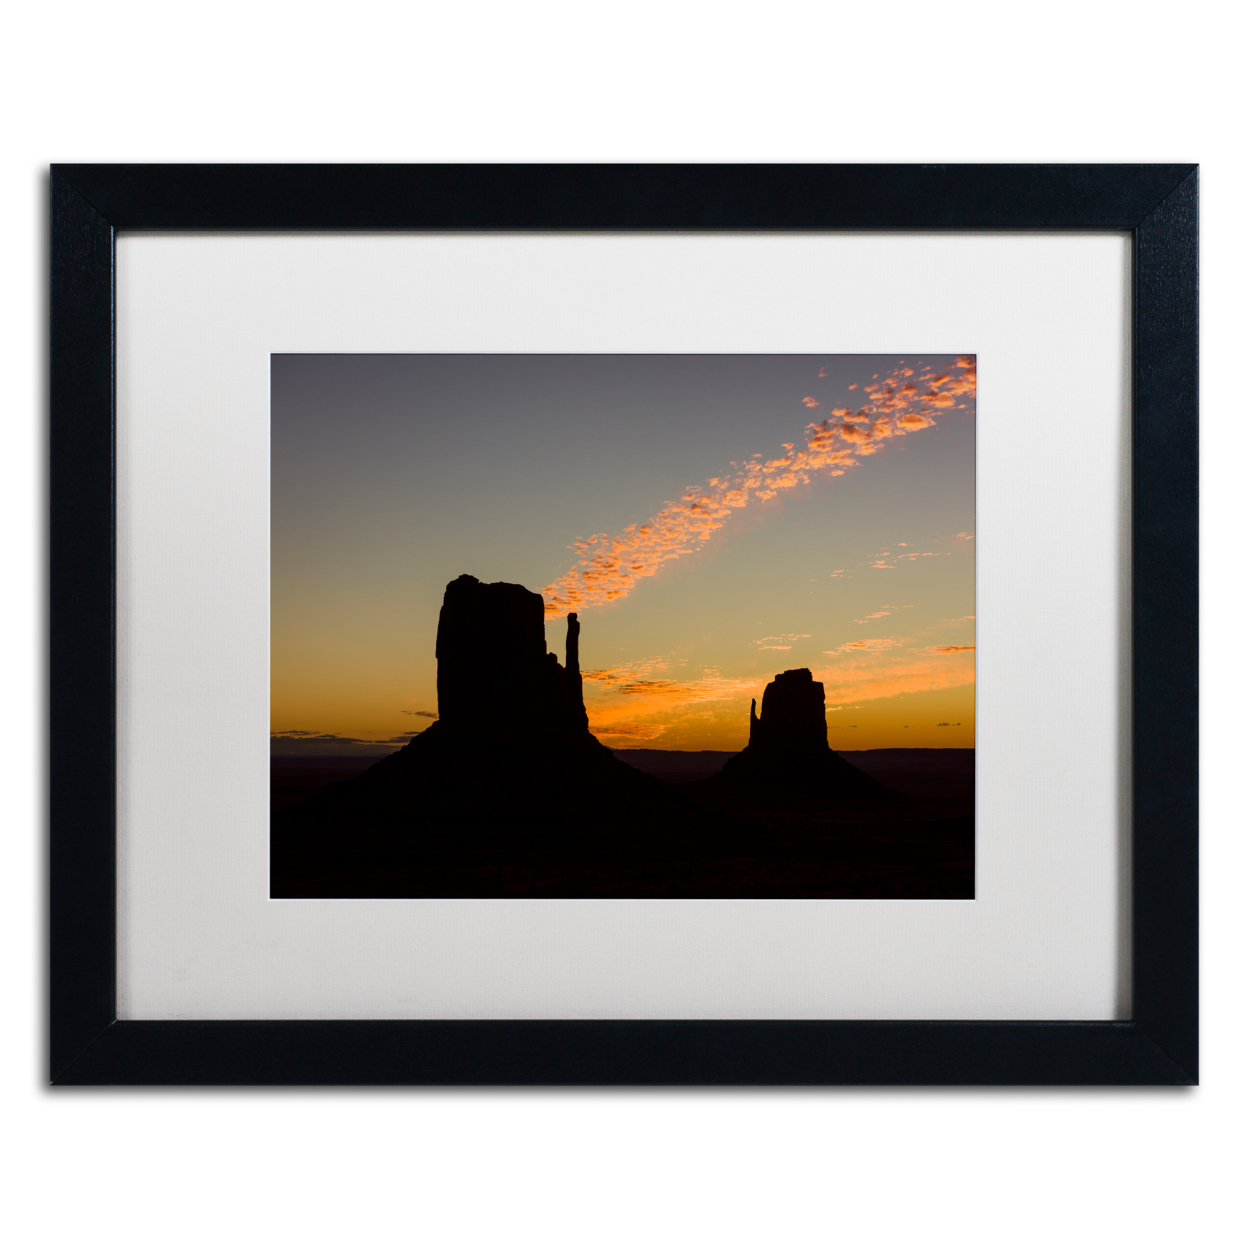 Michael Blanchette Photography 'Cloud Shaft' Black Wooden Framed Art 18 X 22 Inches